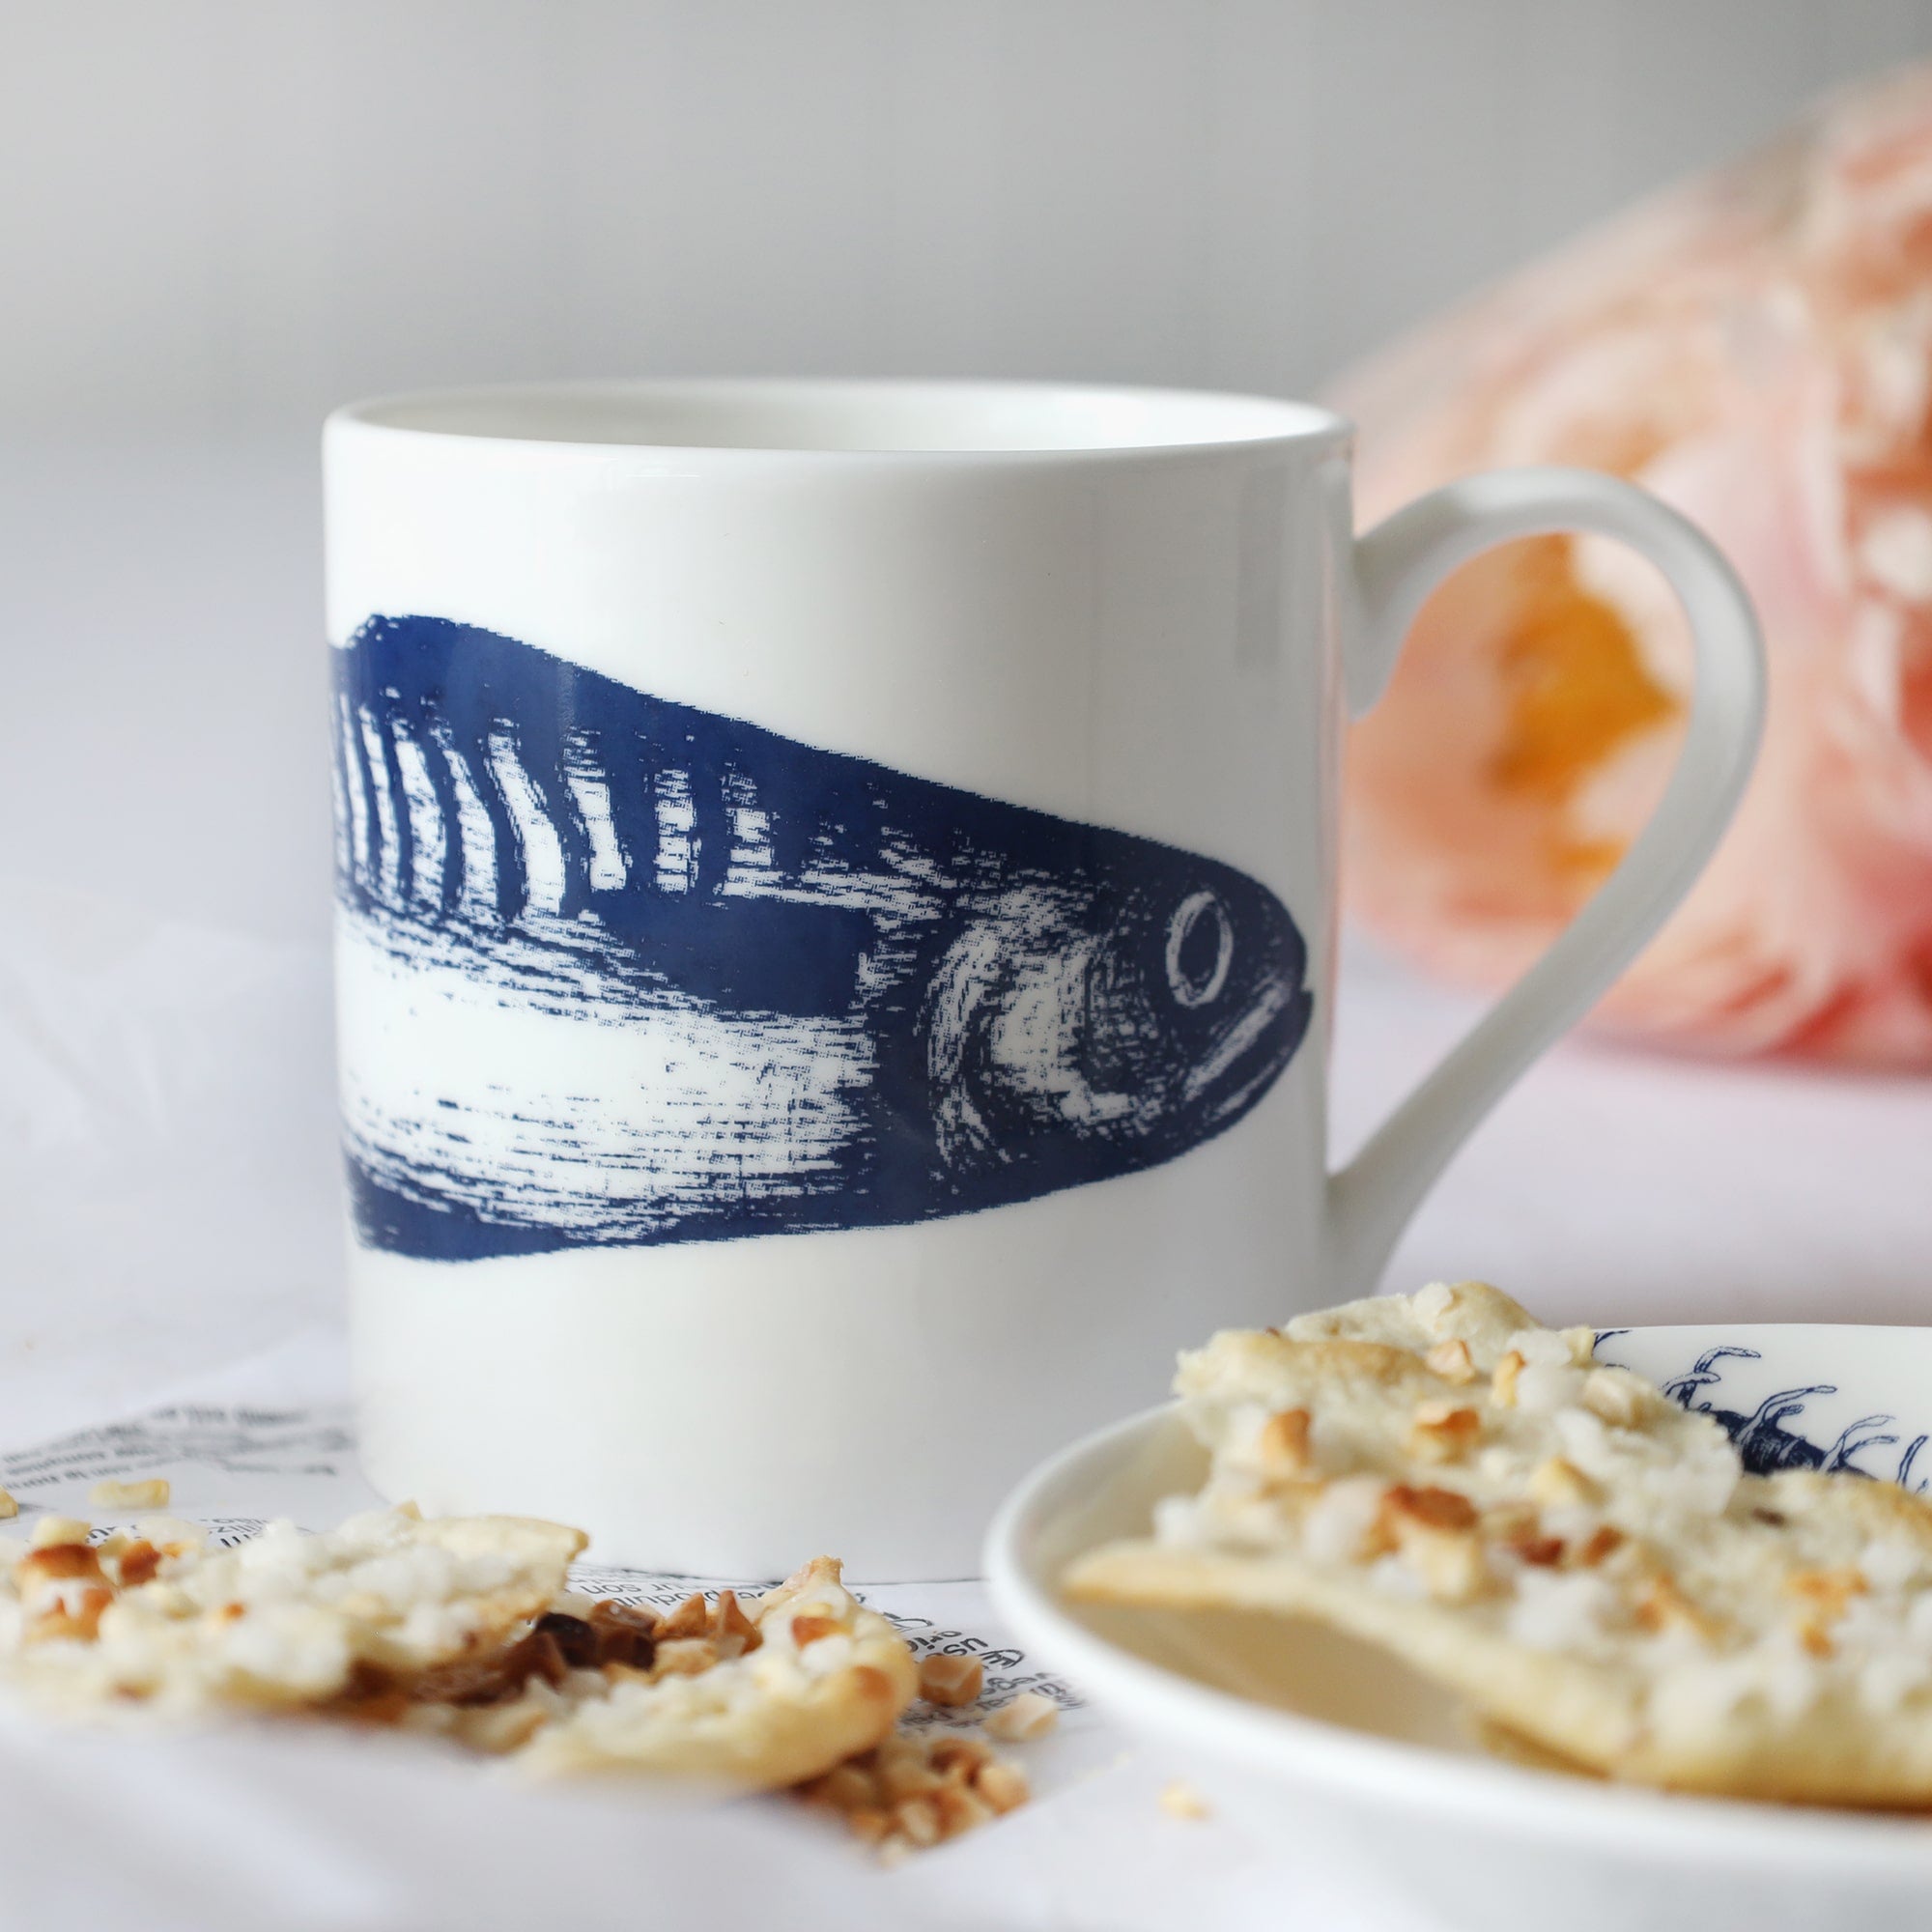 Blue & white bone china mackerel mug on table with biscuits & flowers.